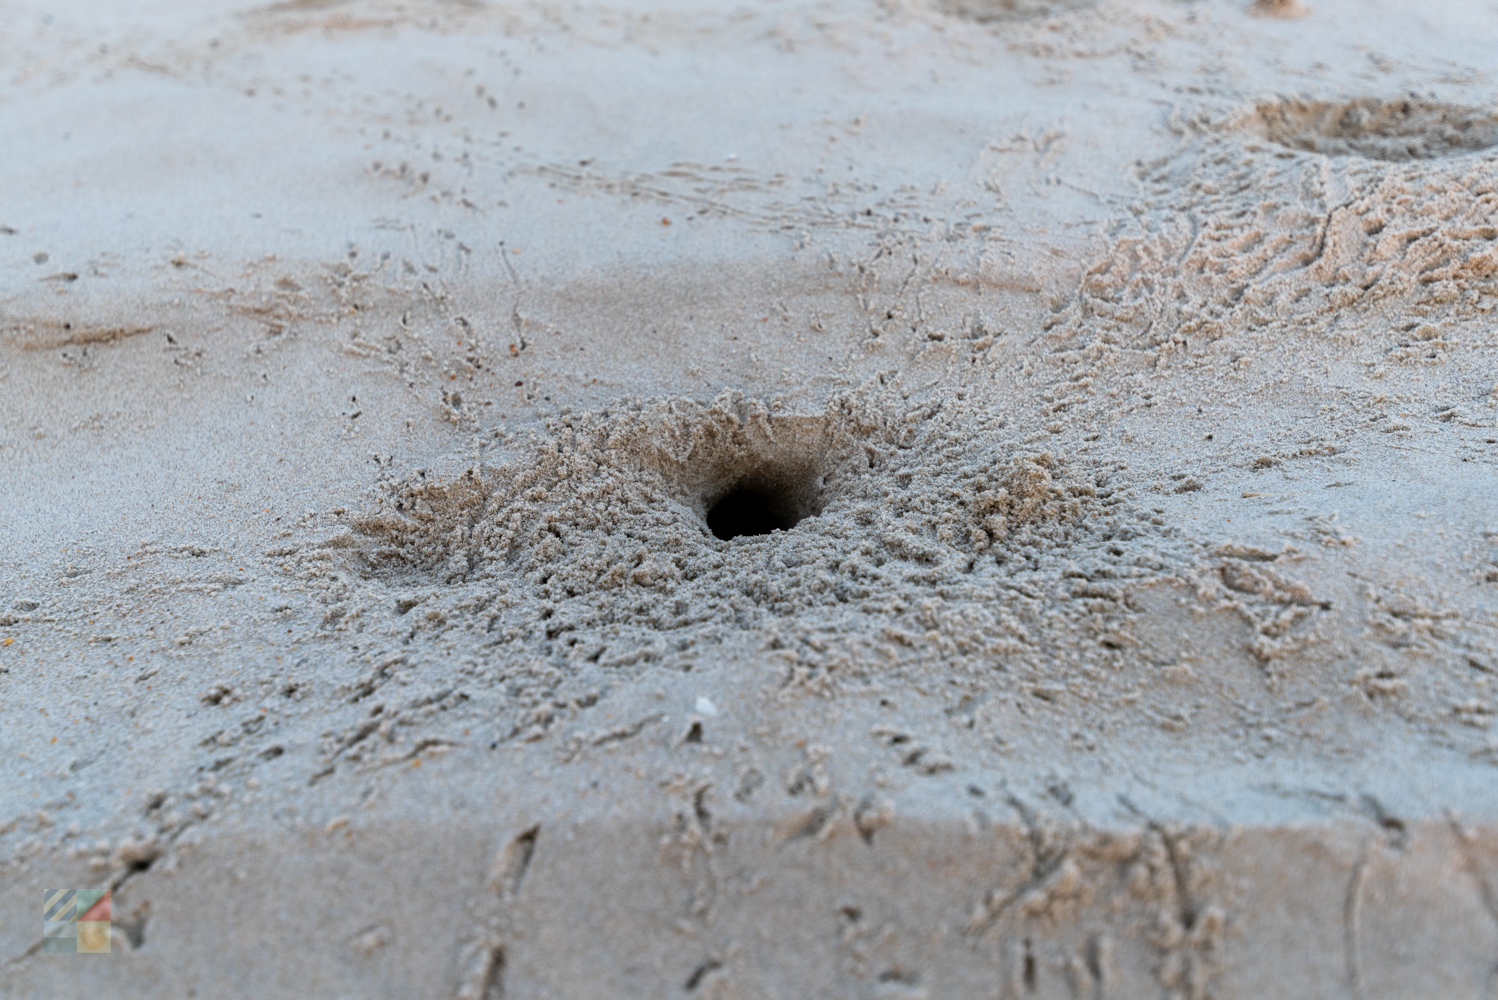 Ghost Crabs holes on the beach